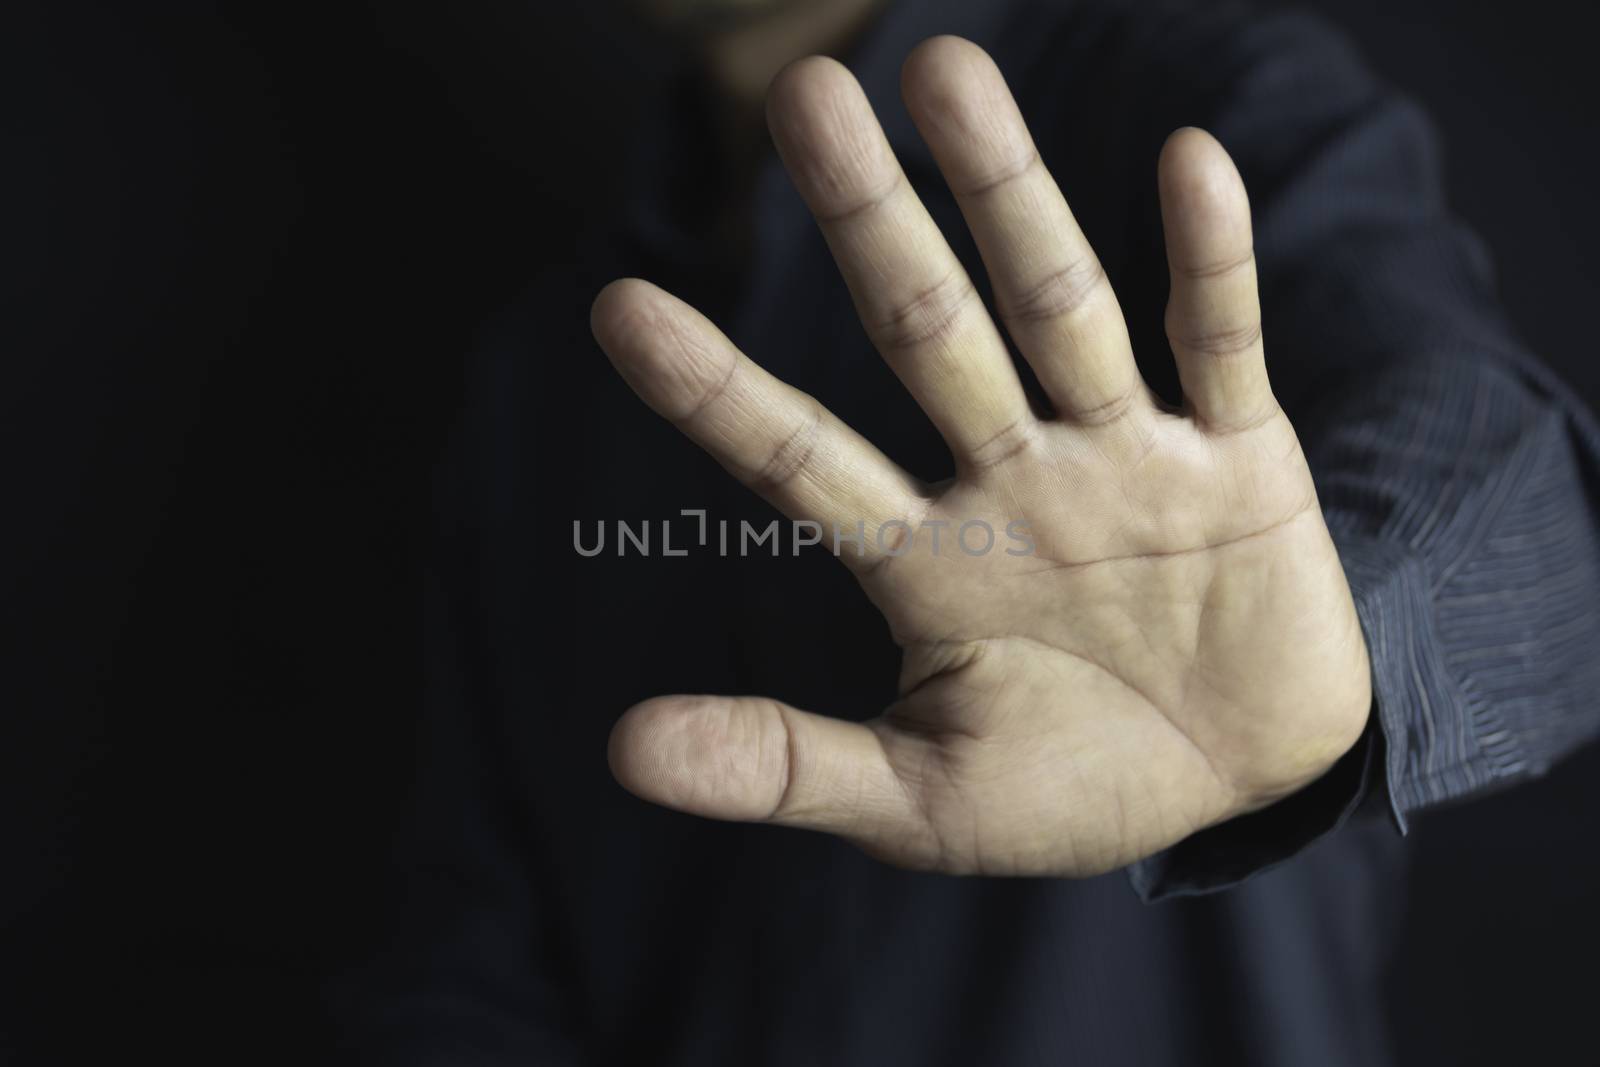 Show hand with stop gesture on black background. Man showing stop gesture.